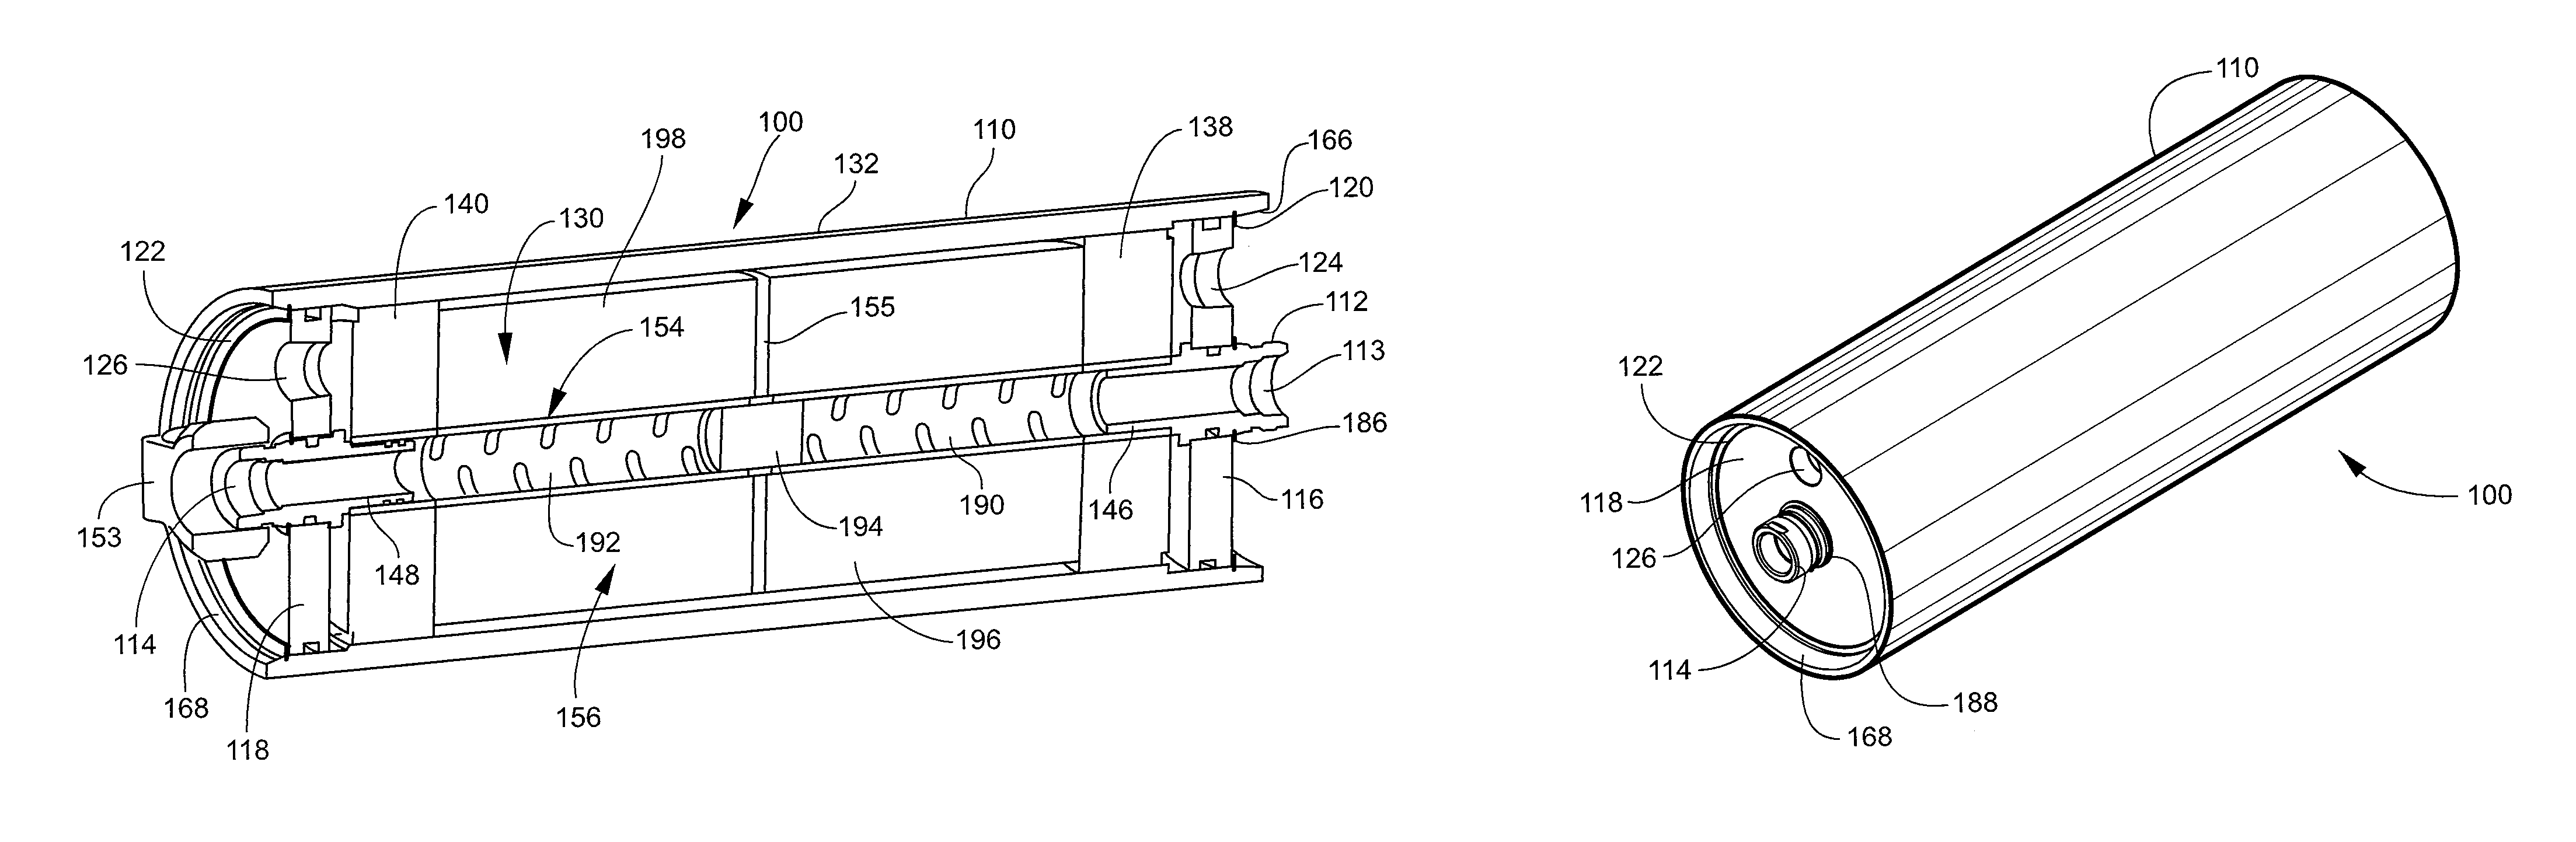 Liquid degassing membrane contactors, components, systems and related methods